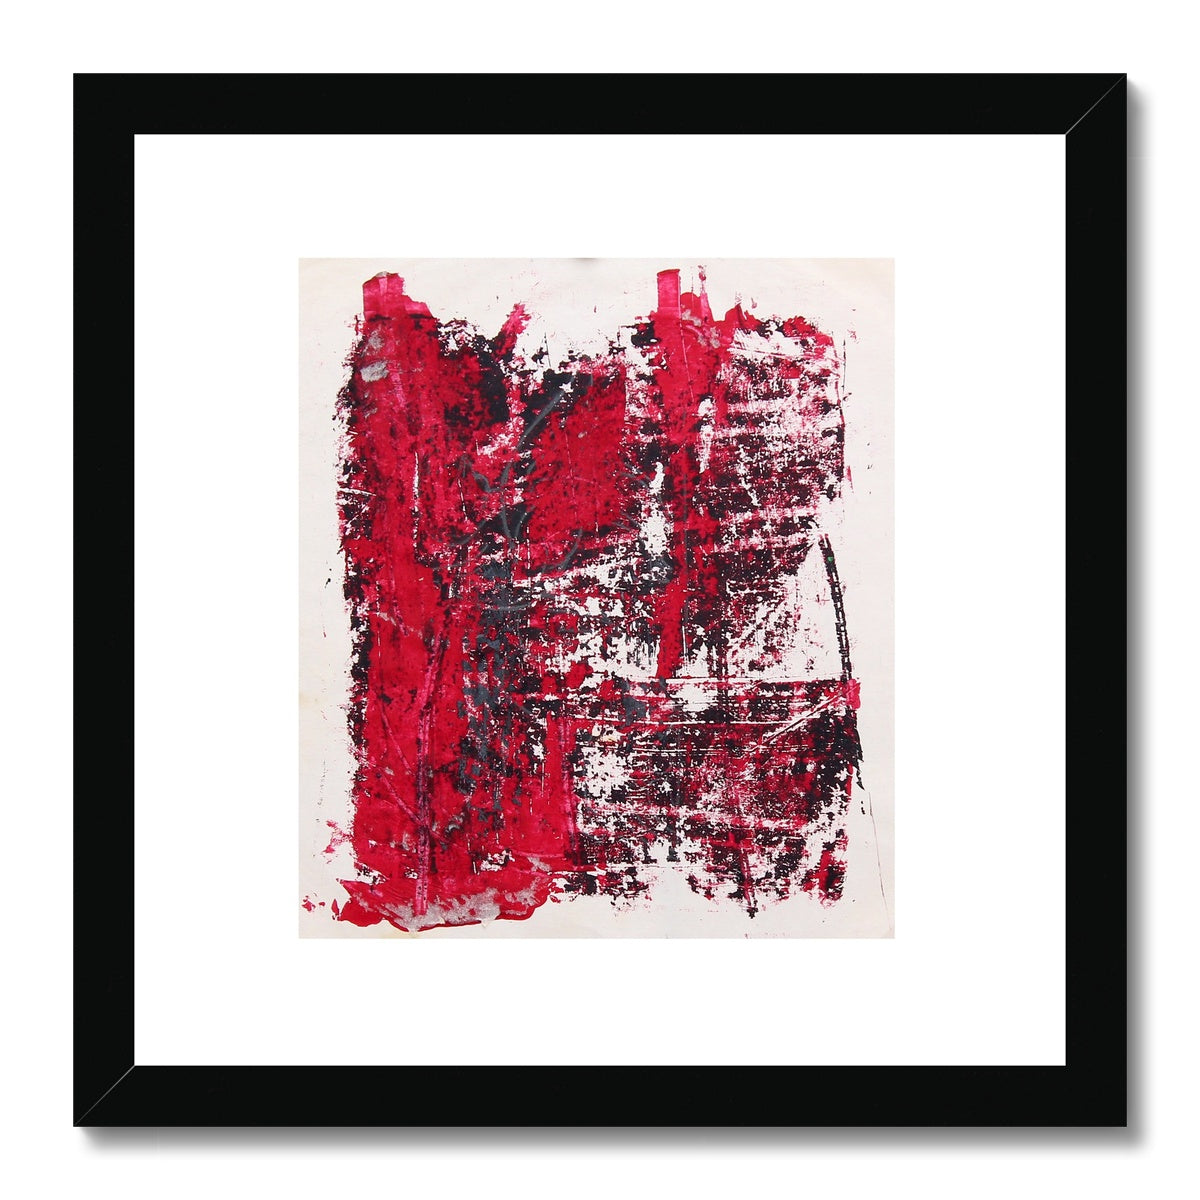 Inhale and exhale 1, Framed & Mounted Print